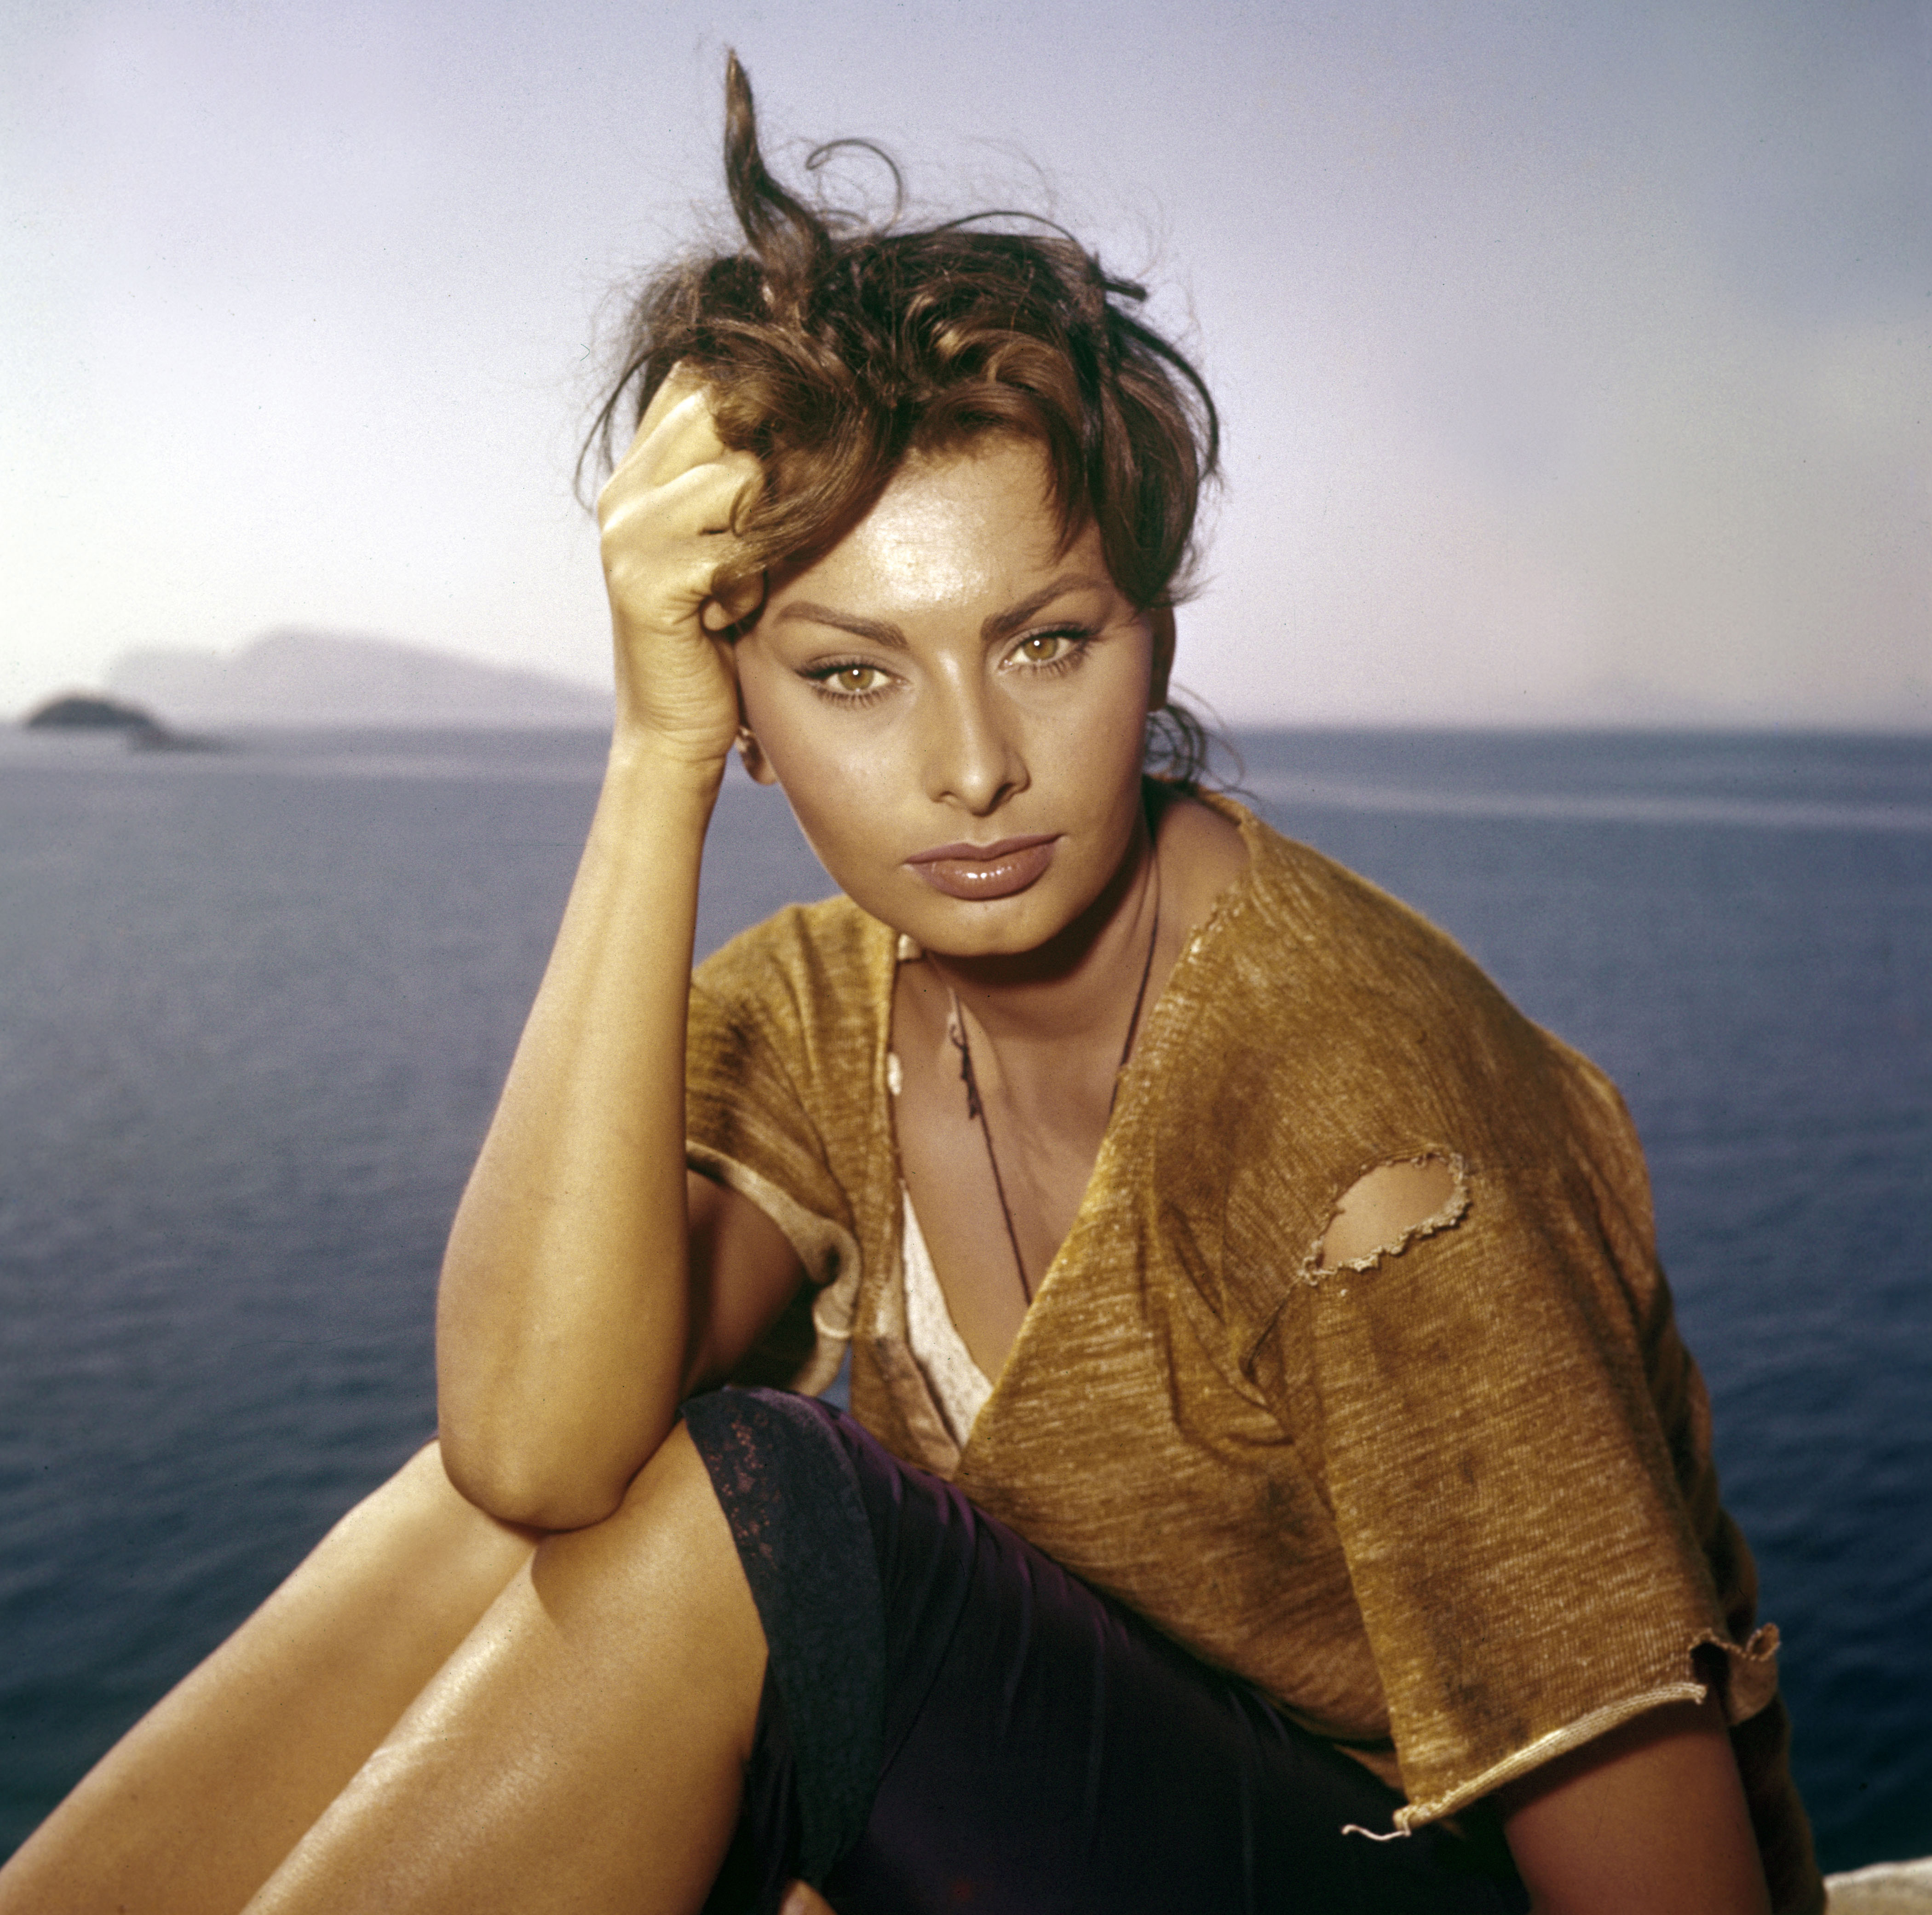 Sophia Loren on the set of "The Boy on a Dolphin," in Greece, 1957. | Source: Getty Images